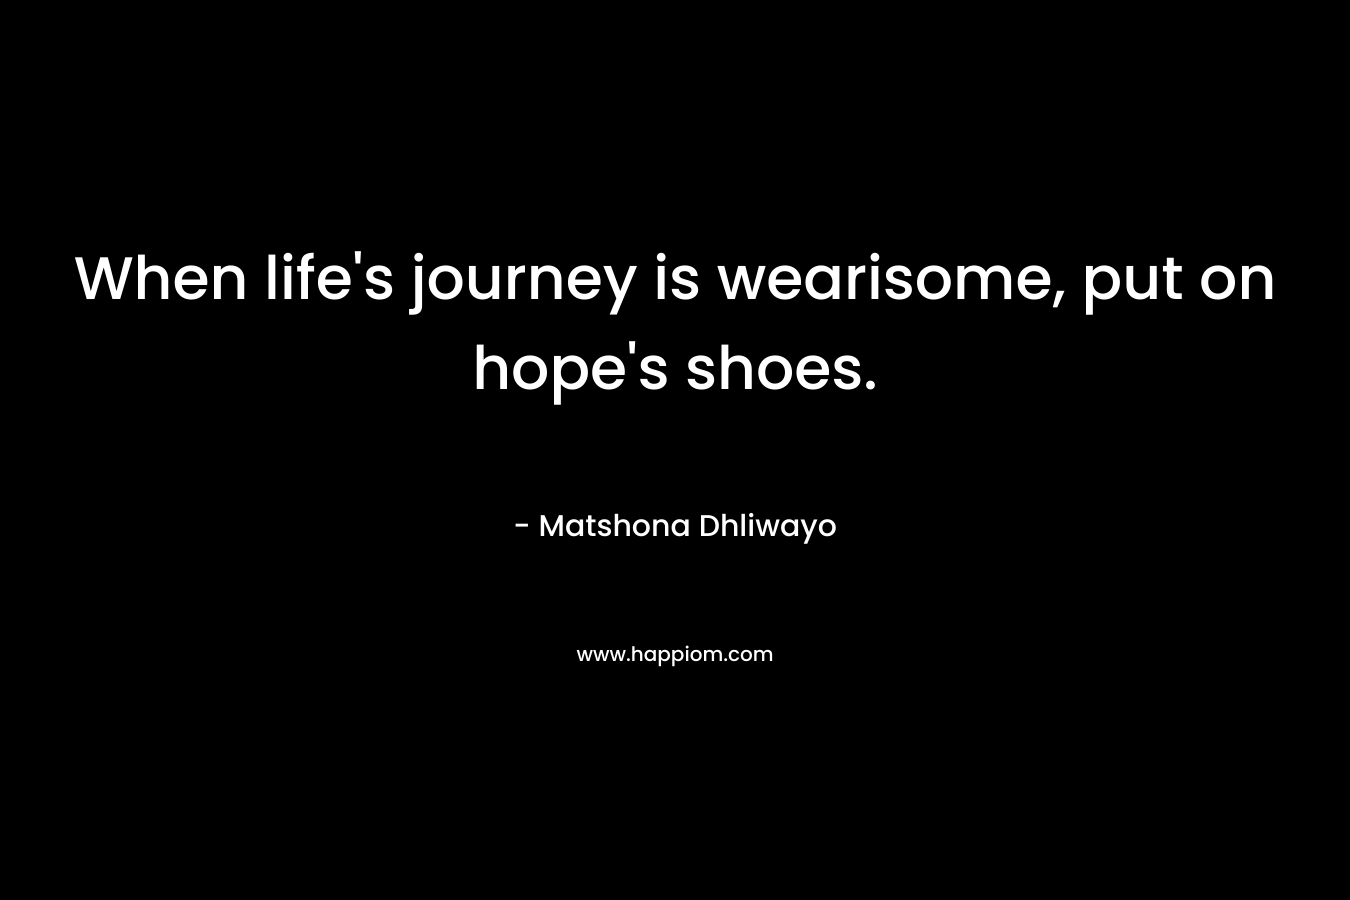 When life's journey is wearisome, put on hope's shoes.